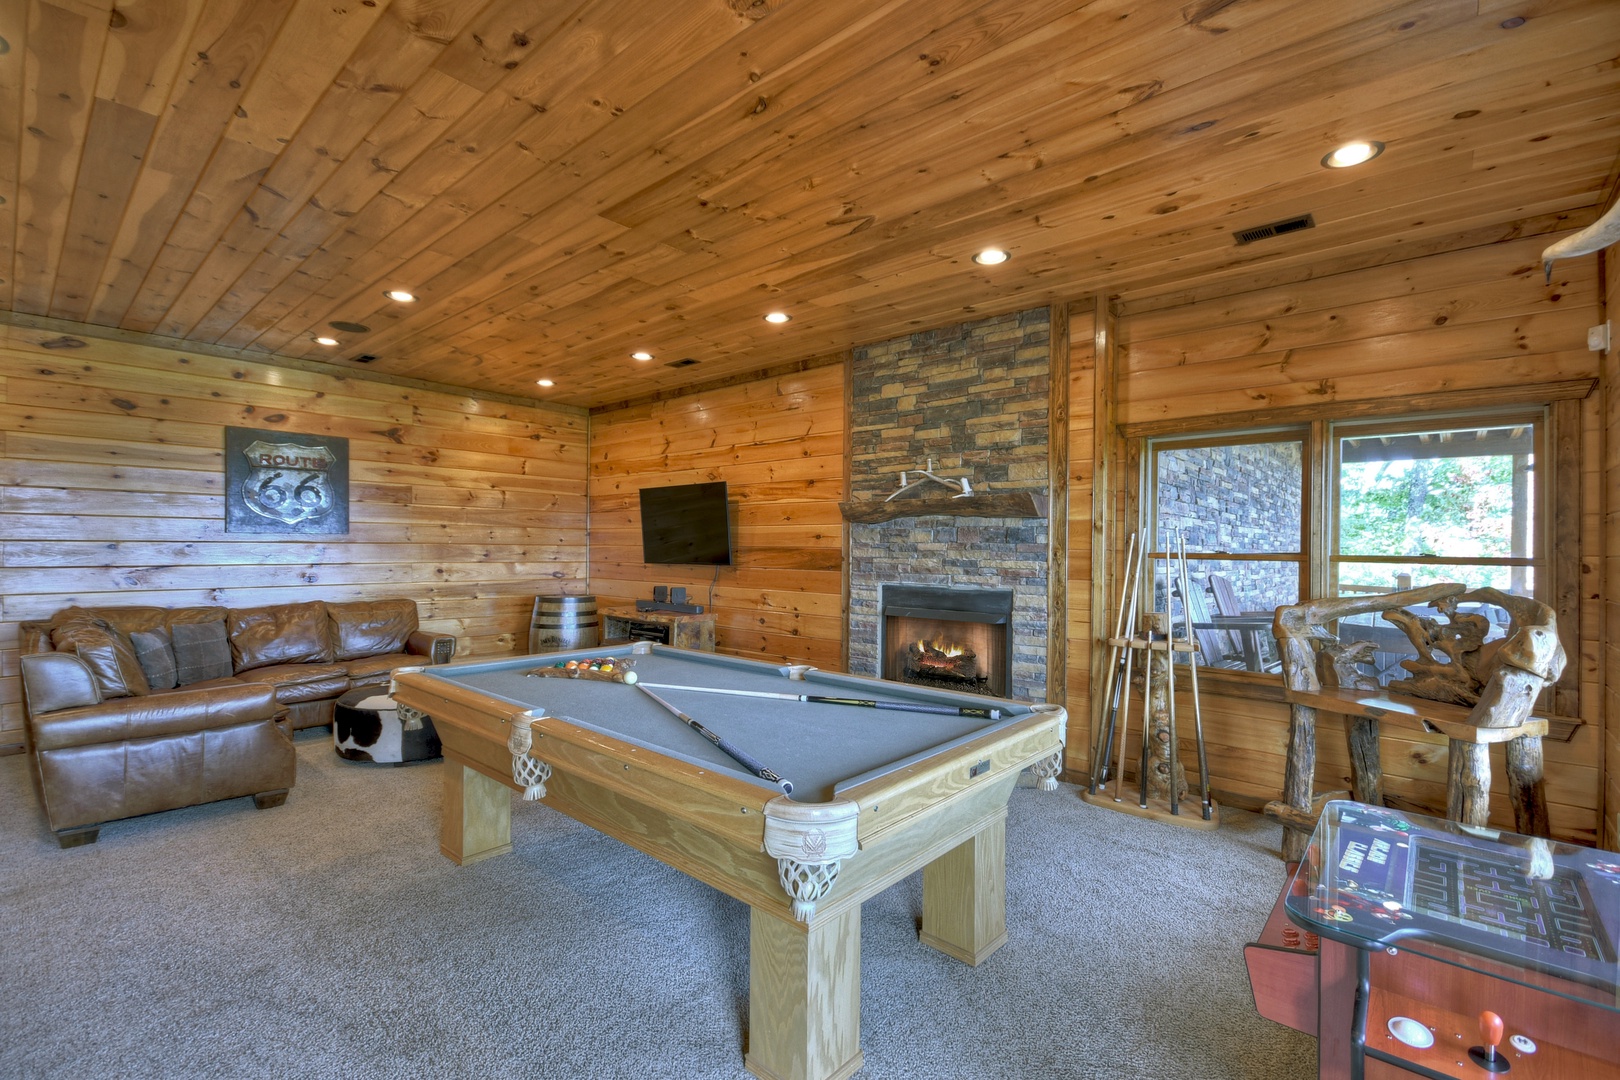 Grand Bluff Retreat- Full game area in the recreation room